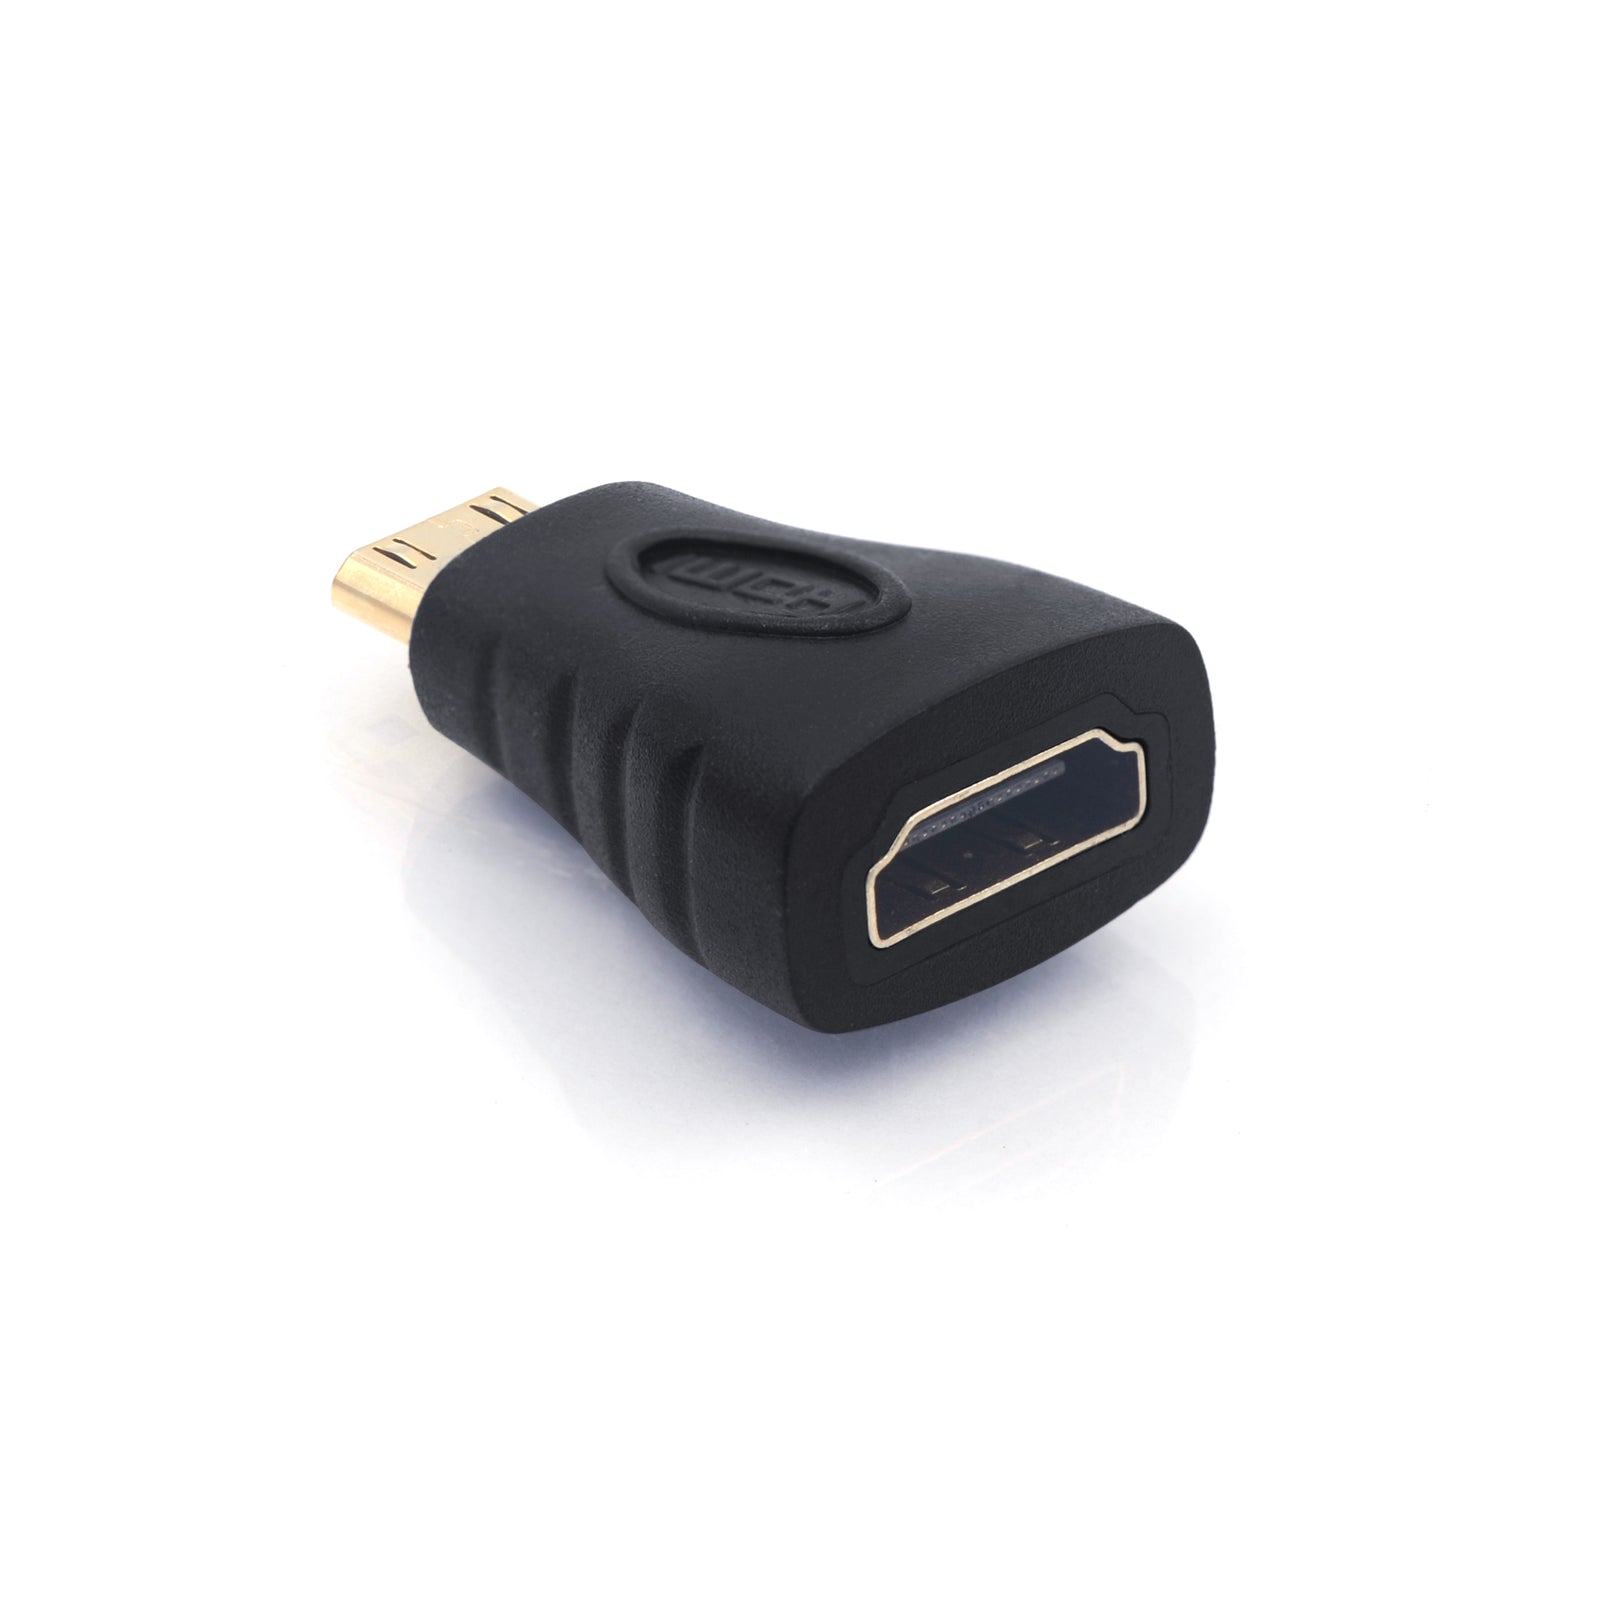 Mini HDMI to HDMI Adapter VCELINK